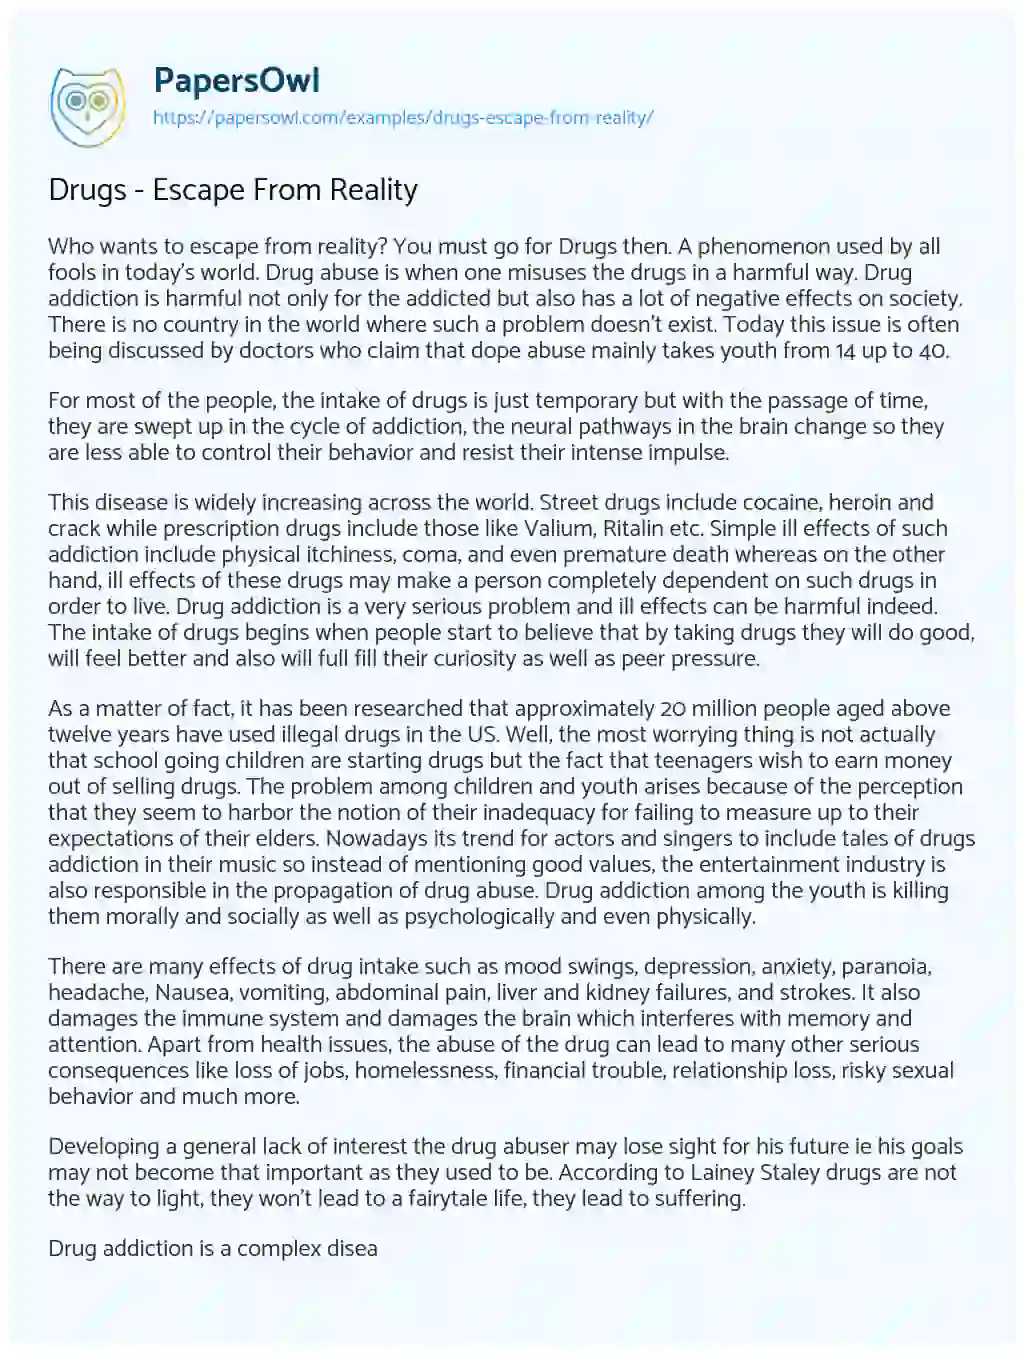 Drugs – Escape from Reality essay